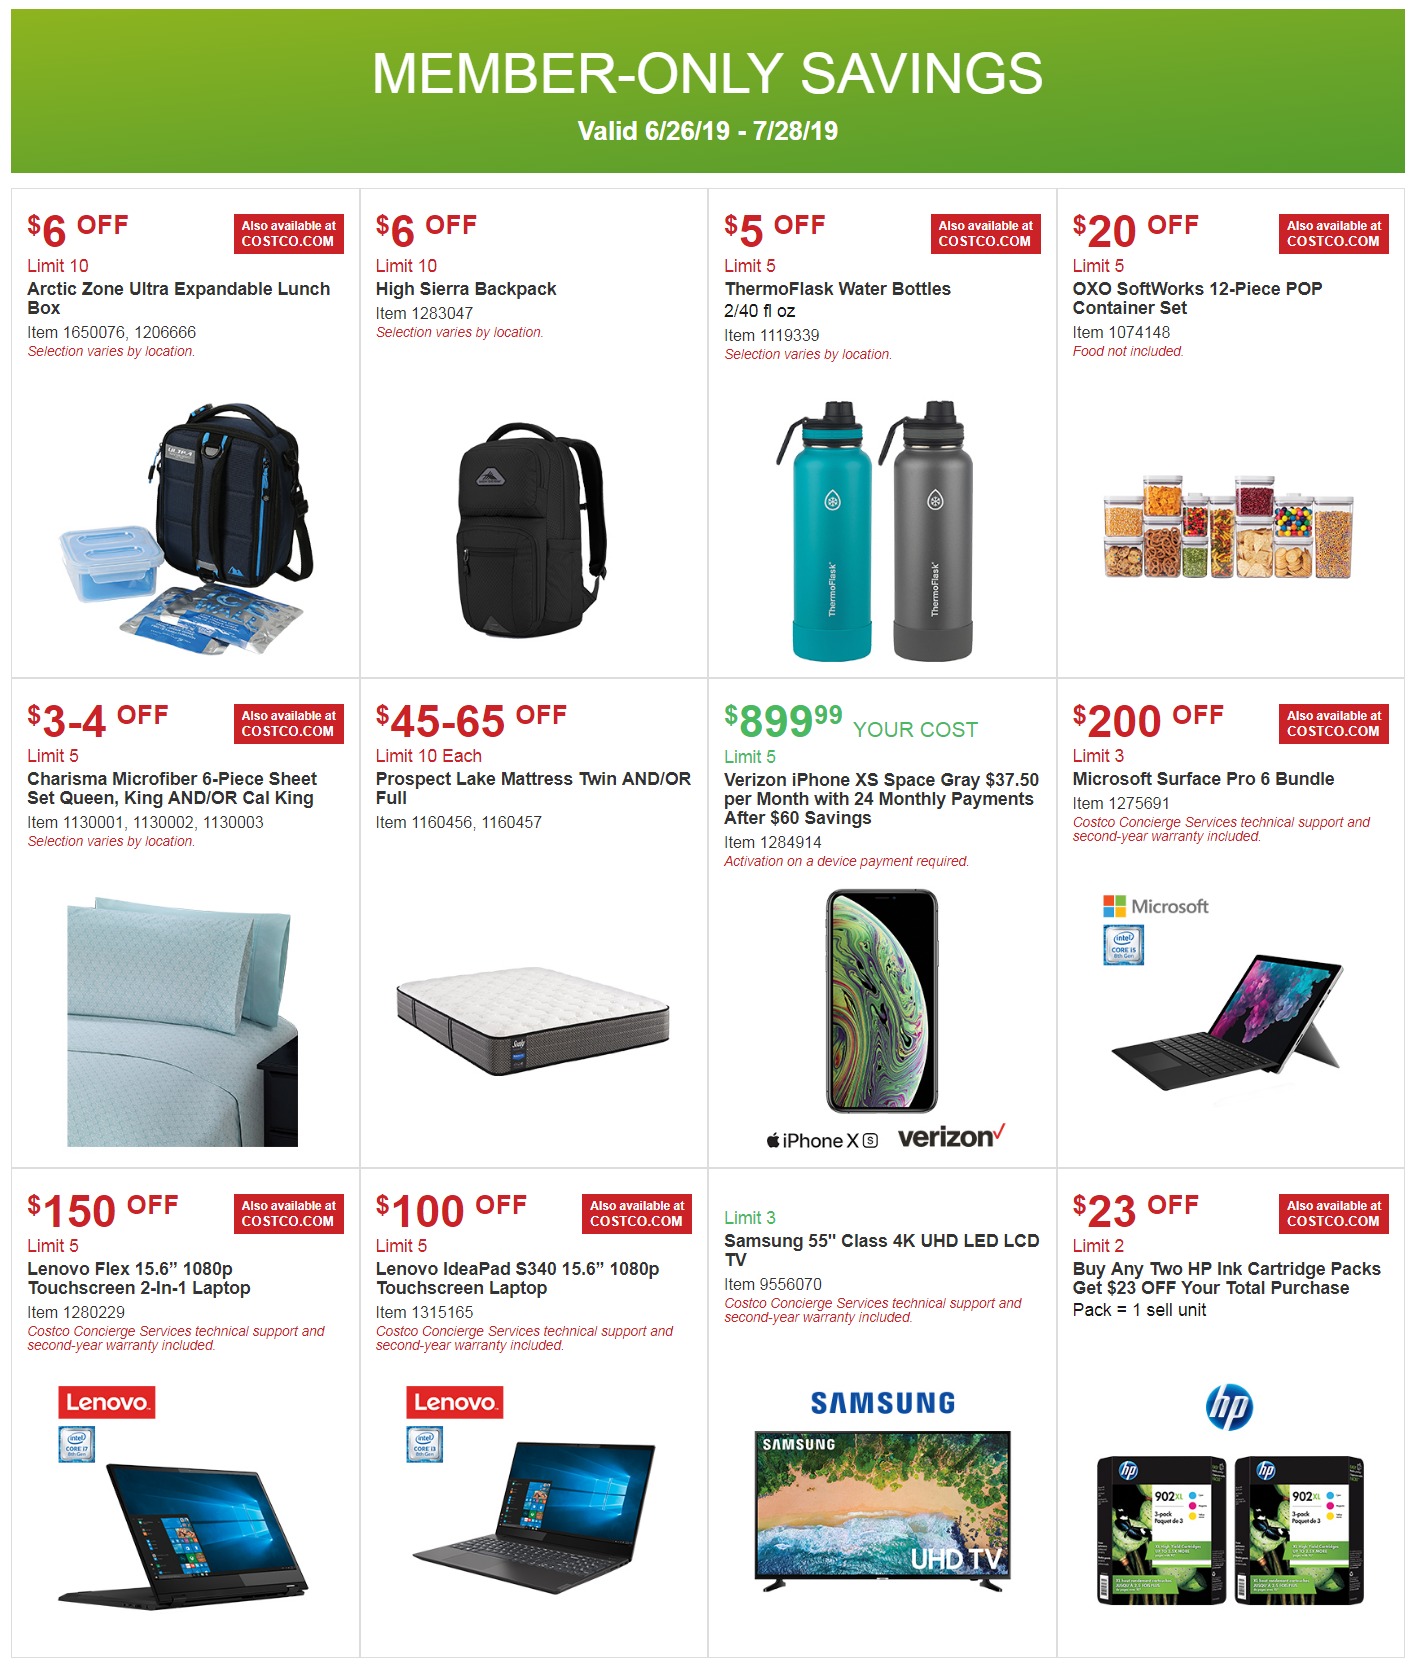 Costco Coupon Offers June 26 - July 28, 2019